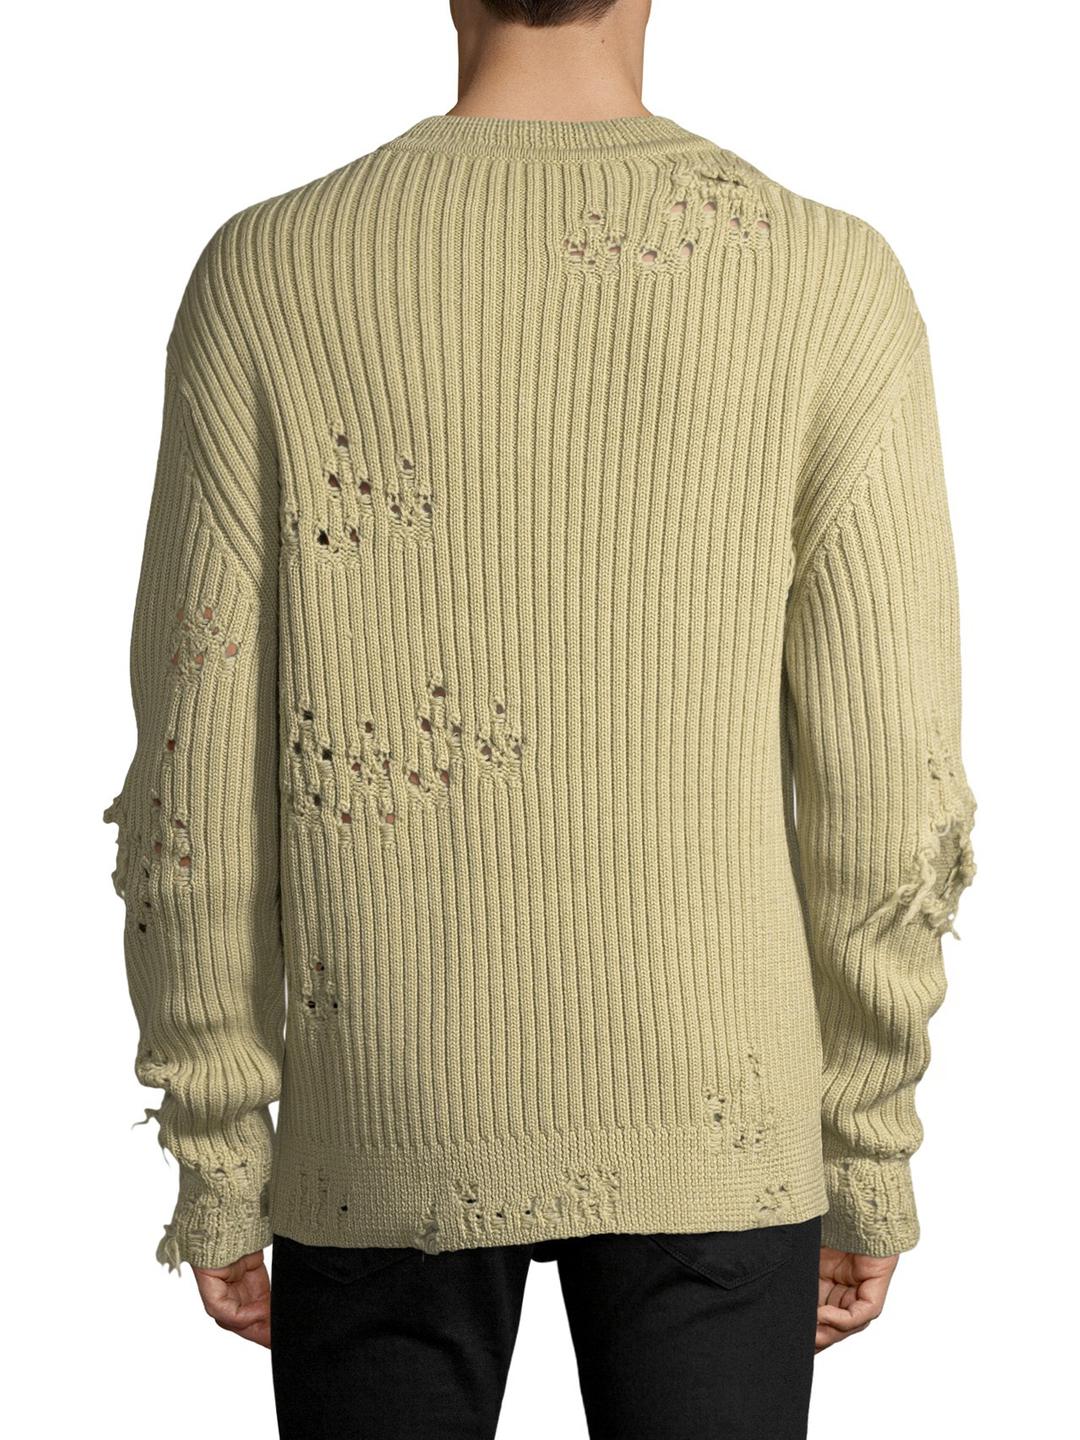 Yeezy Cotton Ribbed Distressed Sweater for Men - Lyst